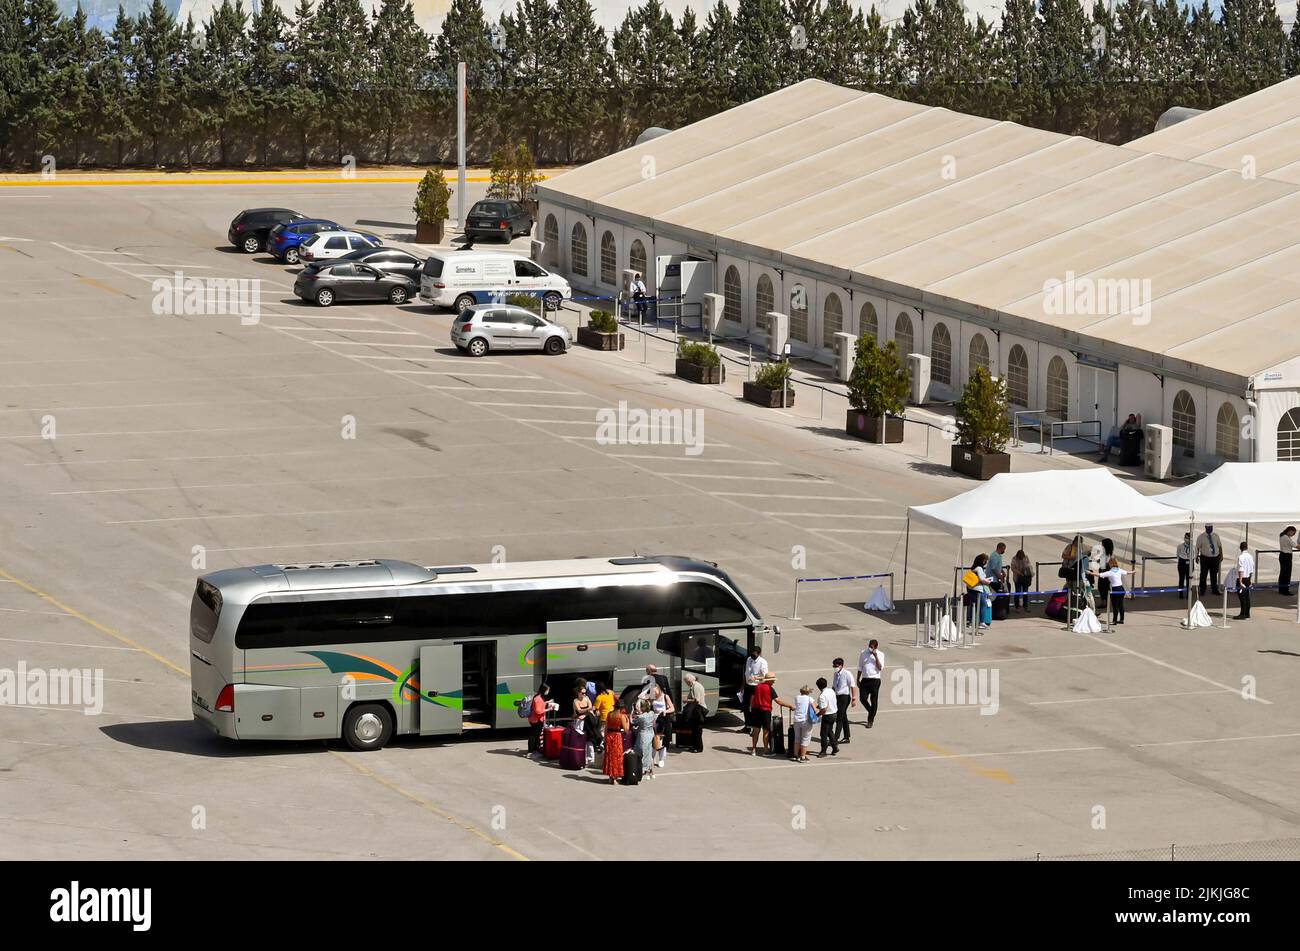 Athens, Greece - may 2022: People collecting luggage from a coach after arriving at one of the city's cruises terminals Stock Photo